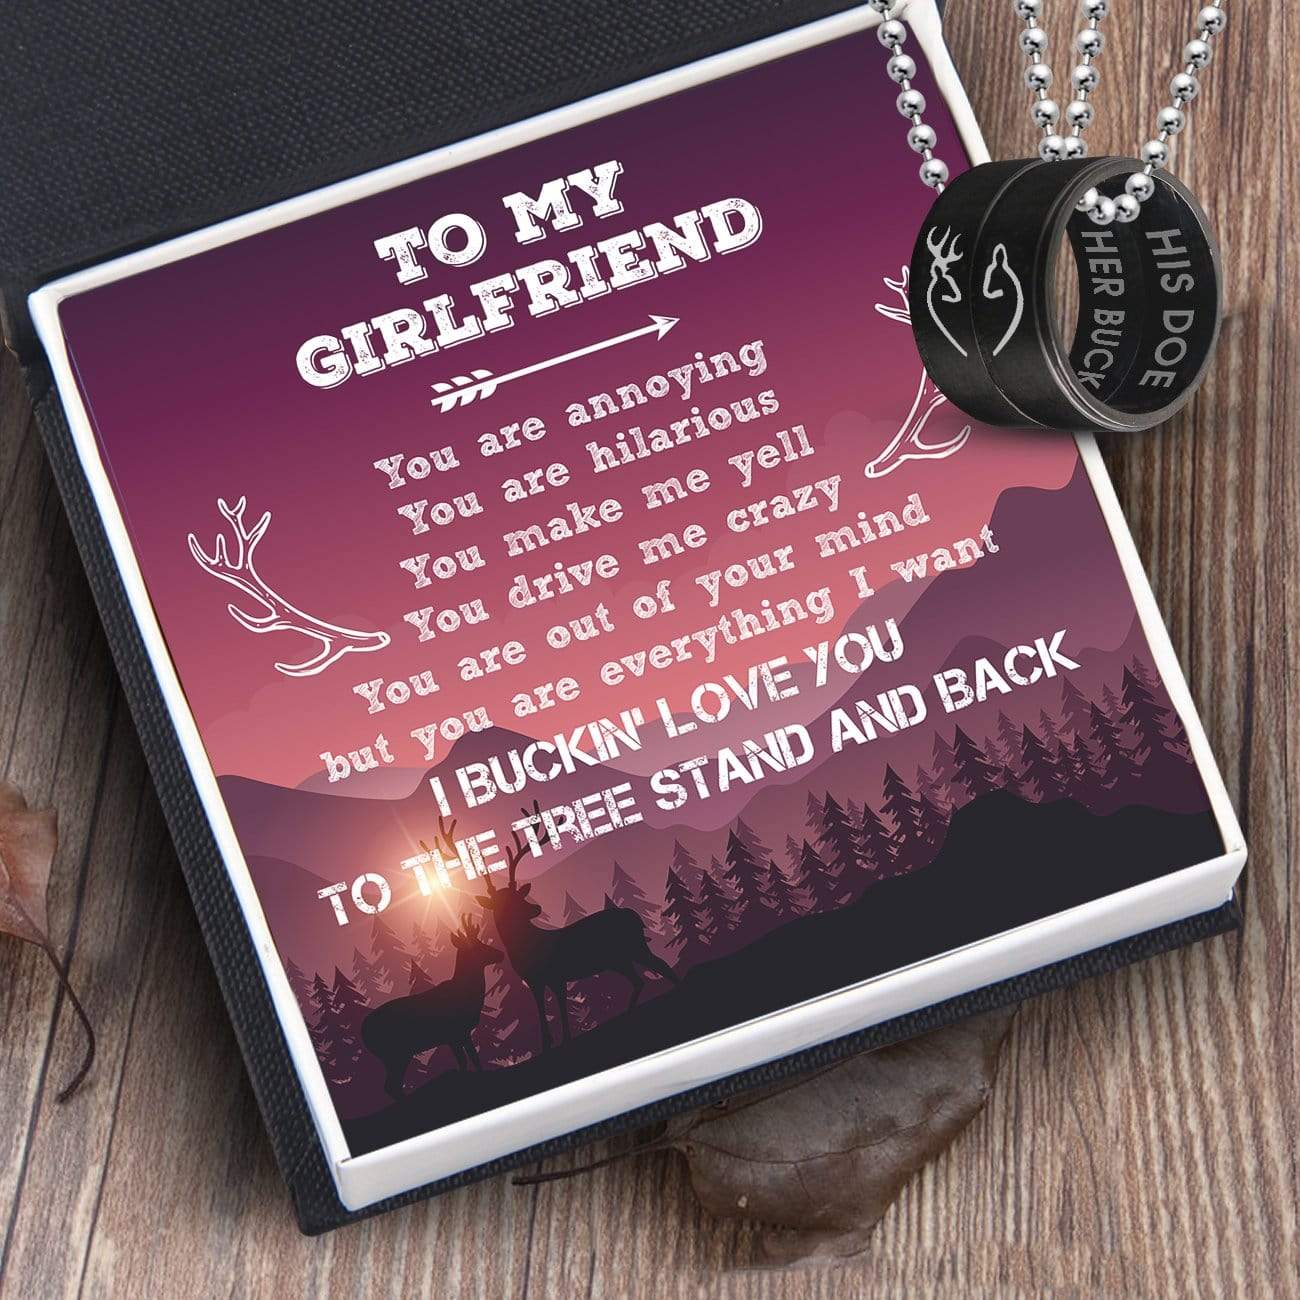 Couple Pendant Necklaces - To My Girlfriend - You Are Everything I Want - Gnw13021